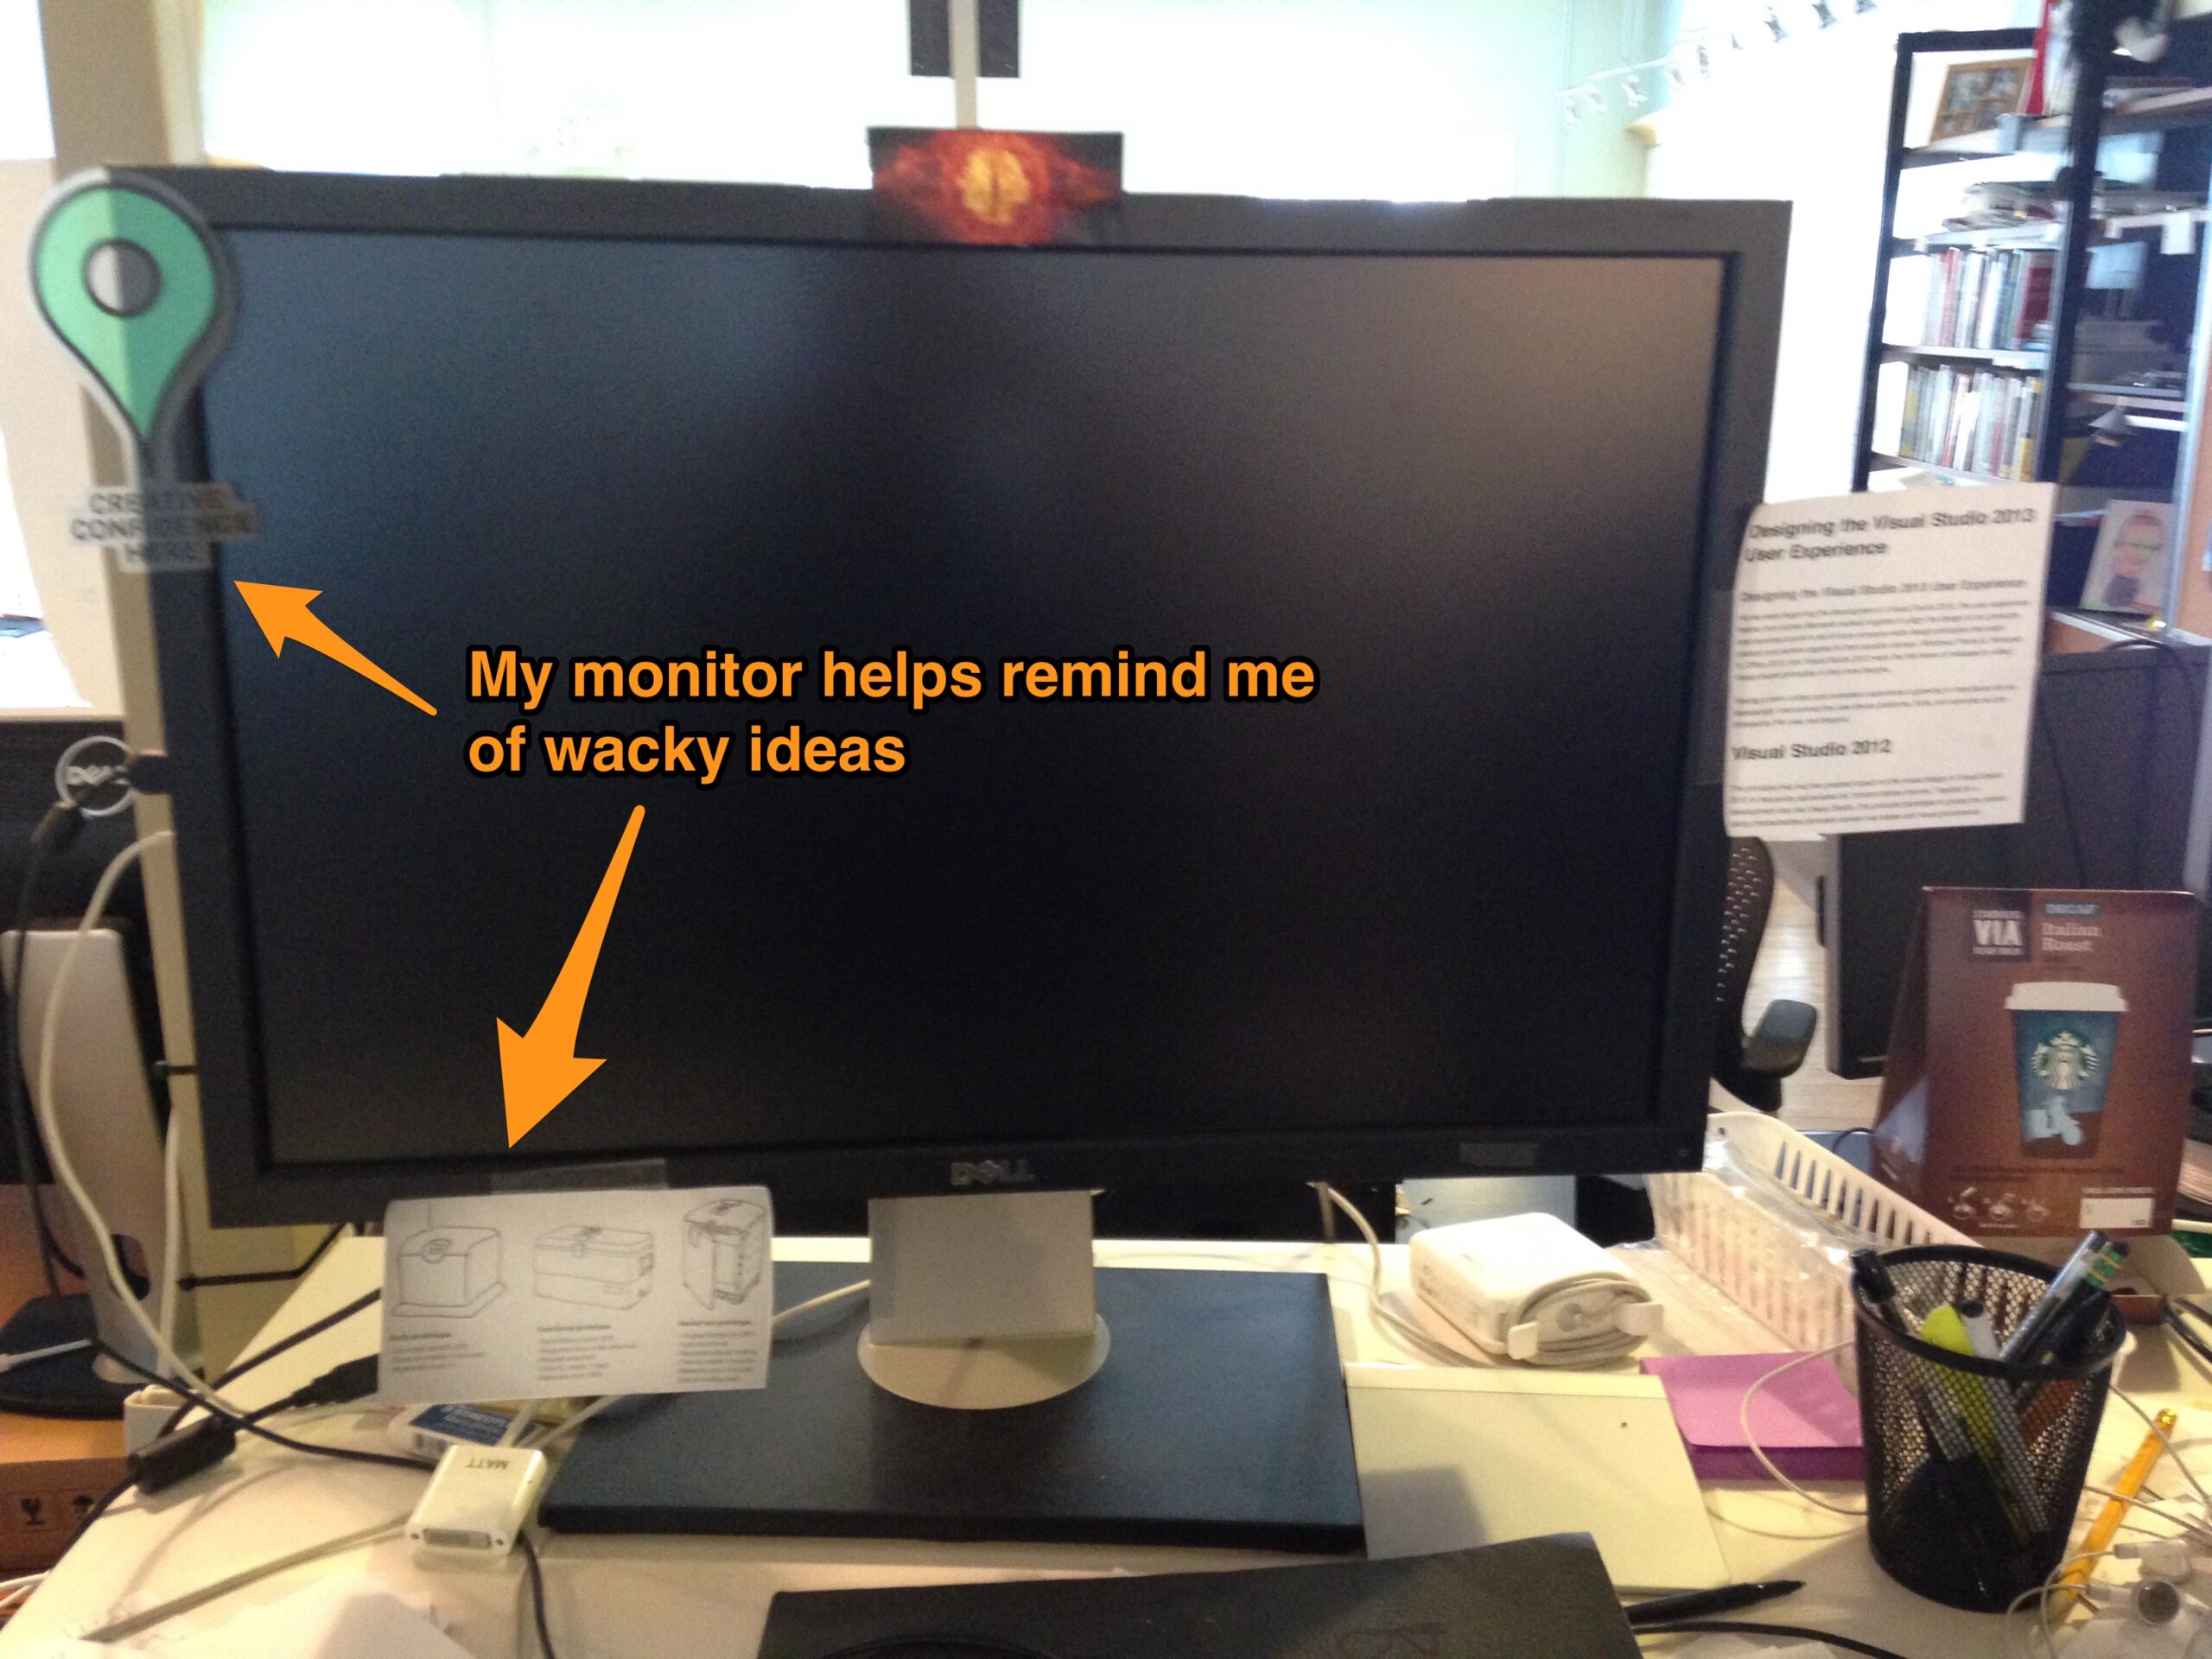 My monitor helps remind me of wacky ideas.